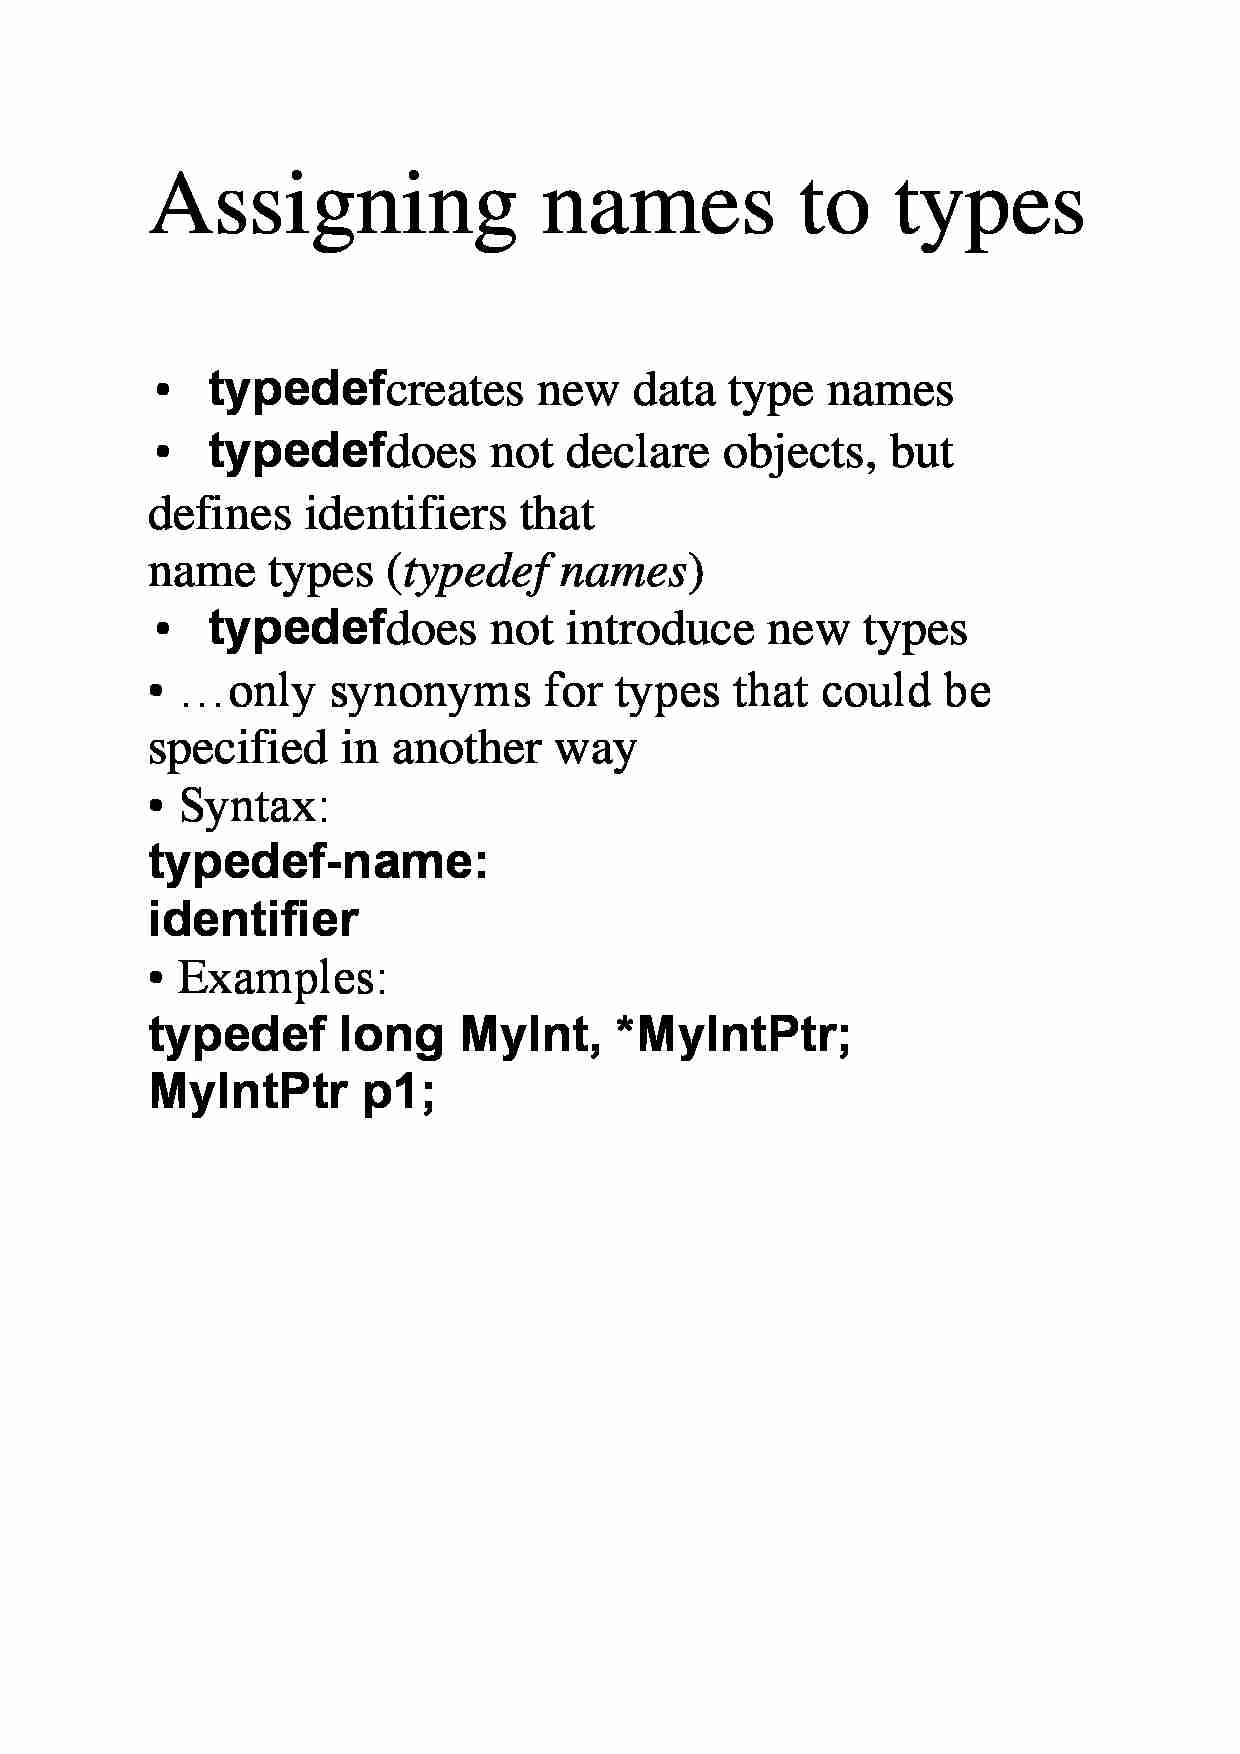 Assigning names to types - strona 1